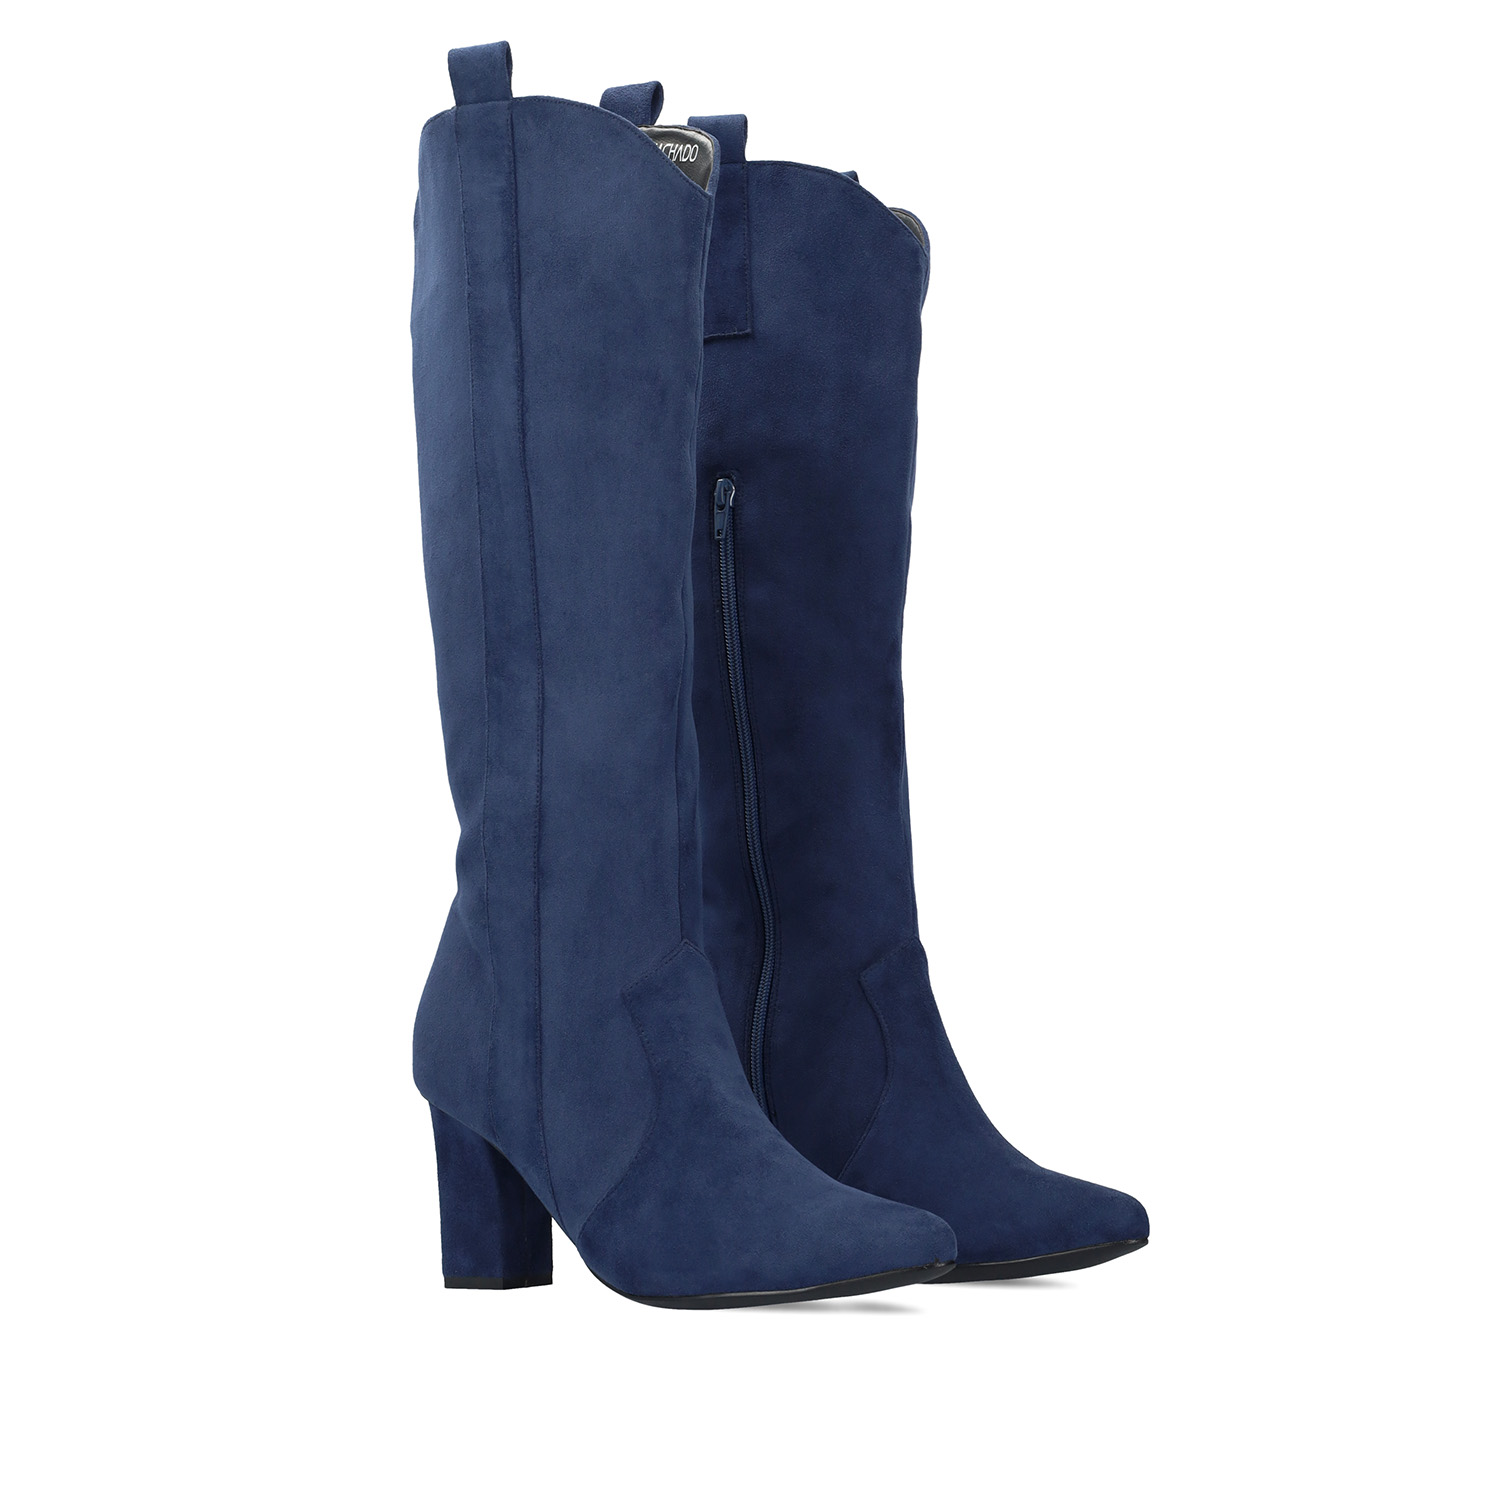 Heeled high boots in dark blue faux suede. 